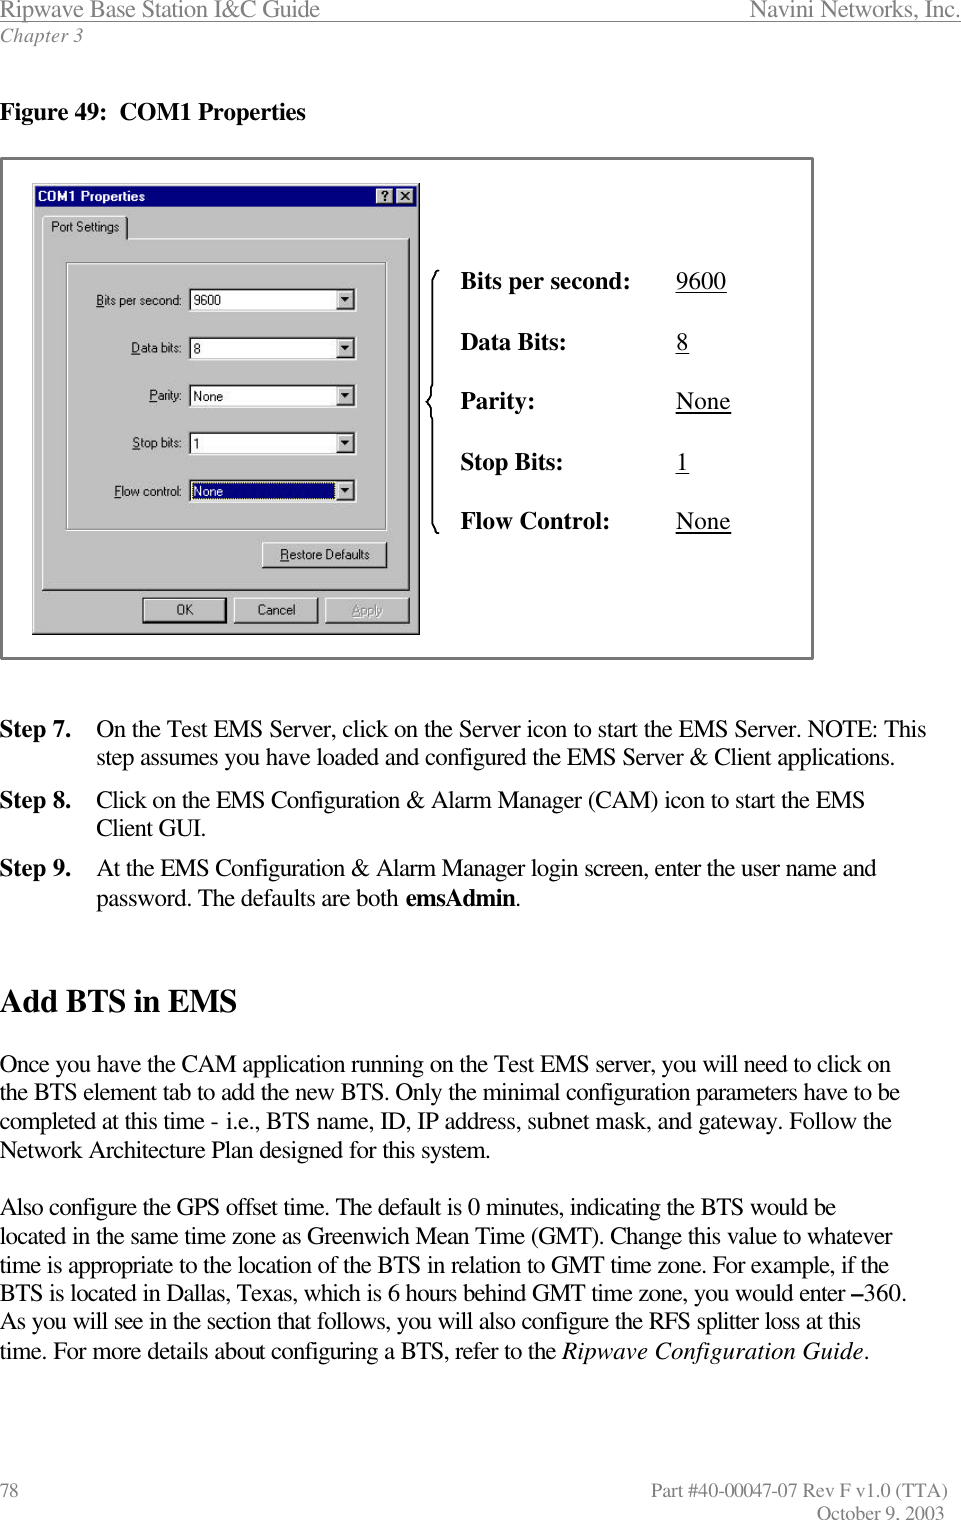 Ripwave Base Station I&amp;C Guide                 Navini Networks, Inc. Chapter 3 78                   Part #40-00047-07 Rev F v1.0 (TTA)         October 9, 2003  Figure 49:  COM1 Properties                     Step 7. On the Test EMS Server, click on the Server icon to start the EMS Server. NOTE: This step assumes you have loaded and configured the EMS Server &amp; Client applications. Step 8. Click on the EMS Configuration &amp; Alarm Manager (CAM) icon to start the EMS Client GUI. Step 9. At the EMS Configuration &amp; Alarm Manager login screen, enter the user name and password. The defaults are both emsAdmin.   Add BTS in EMS  Once you have the CAM application running on the Test EMS server, you will need to click on the BTS element tab to add the new BTS. Only the minimal configuration parameters have to be completed at this time - i.e., BTS name, ID, IP address, subnet mask, and gateway. Follow the Network Architecture Plan designed for this system.   Also configure the GPS offset time. The default is 0 minutes, indicating the BTS would be located in the same time zone as Greenwich Mean Time (GMT). Change this value to whatever time is appropriate to the location of the BTS in relation to GMT time zone. For example, if the BTS is located in Dallas, Texas, which is 6 hours behind GMT time zone, you would enter –360. As you will see in the section that follows, you will also configure the RFS splitter loss at this time. For more details about configuring a BTS, refer to the Ripwave Configuration Guide.   Bits per second:   9600Data Bits:   8Parity:   NoneStop Bits:   1Flow Control:   NoneBits per second:   9600Data Bits:   8Parity:   NoneStop Bits:   1Flow Control:   None